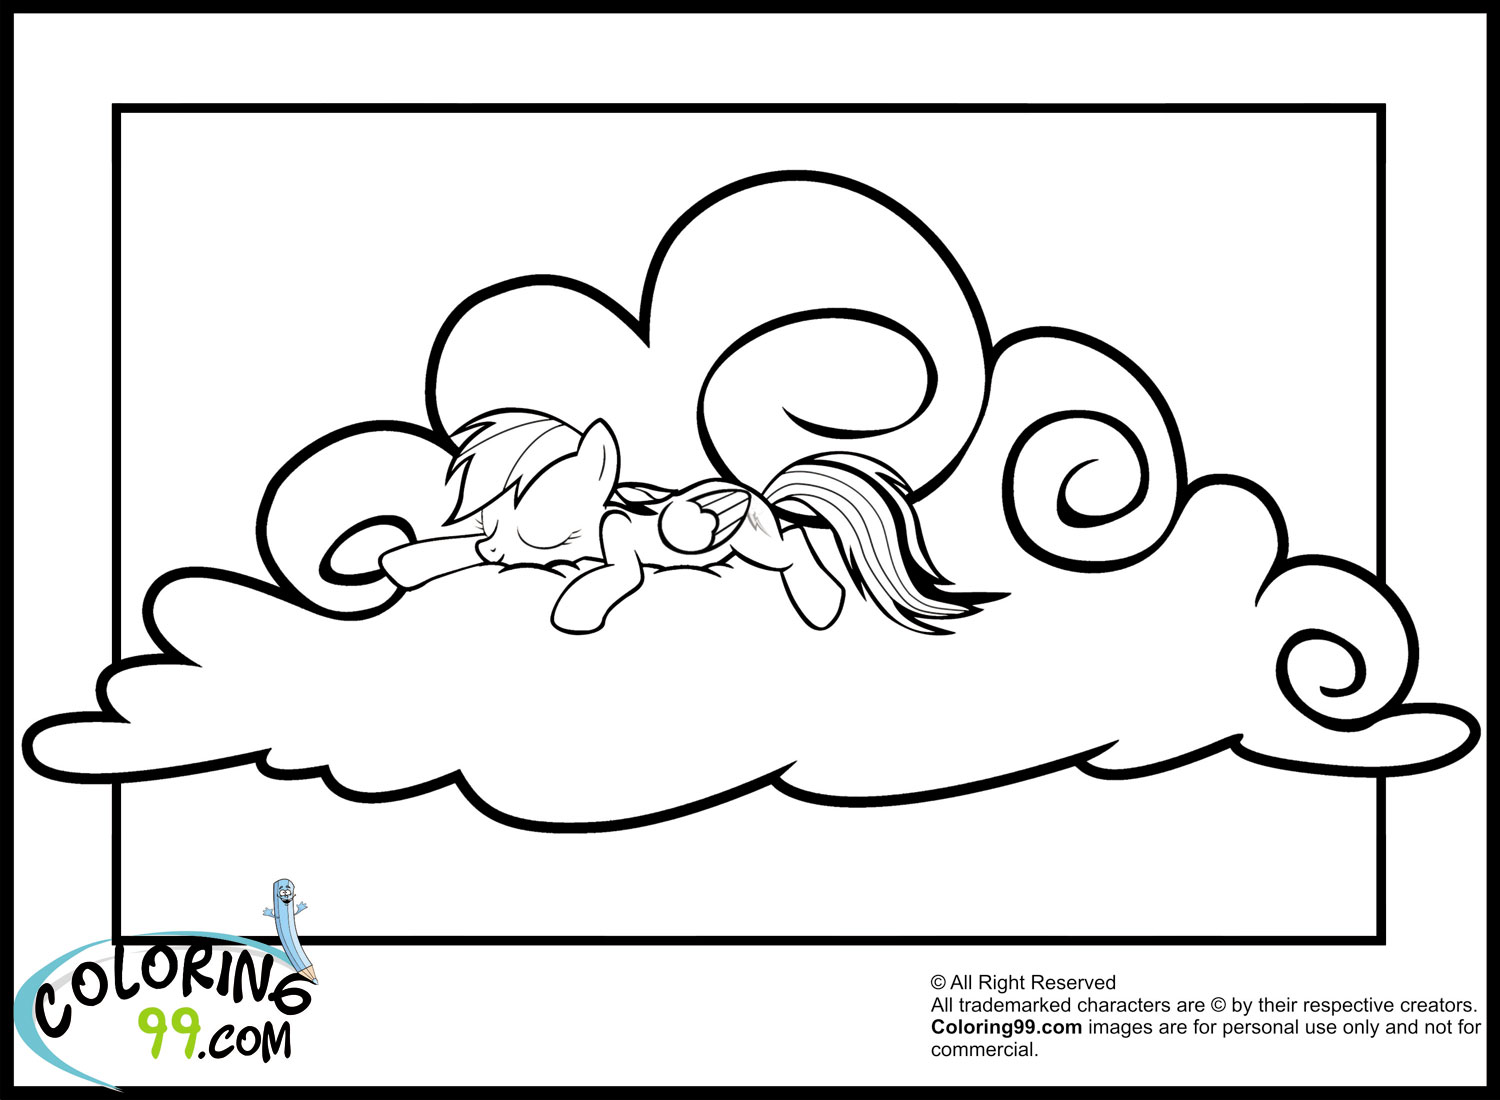 Rainbow Dash Coloring Pages | Minister Coloring